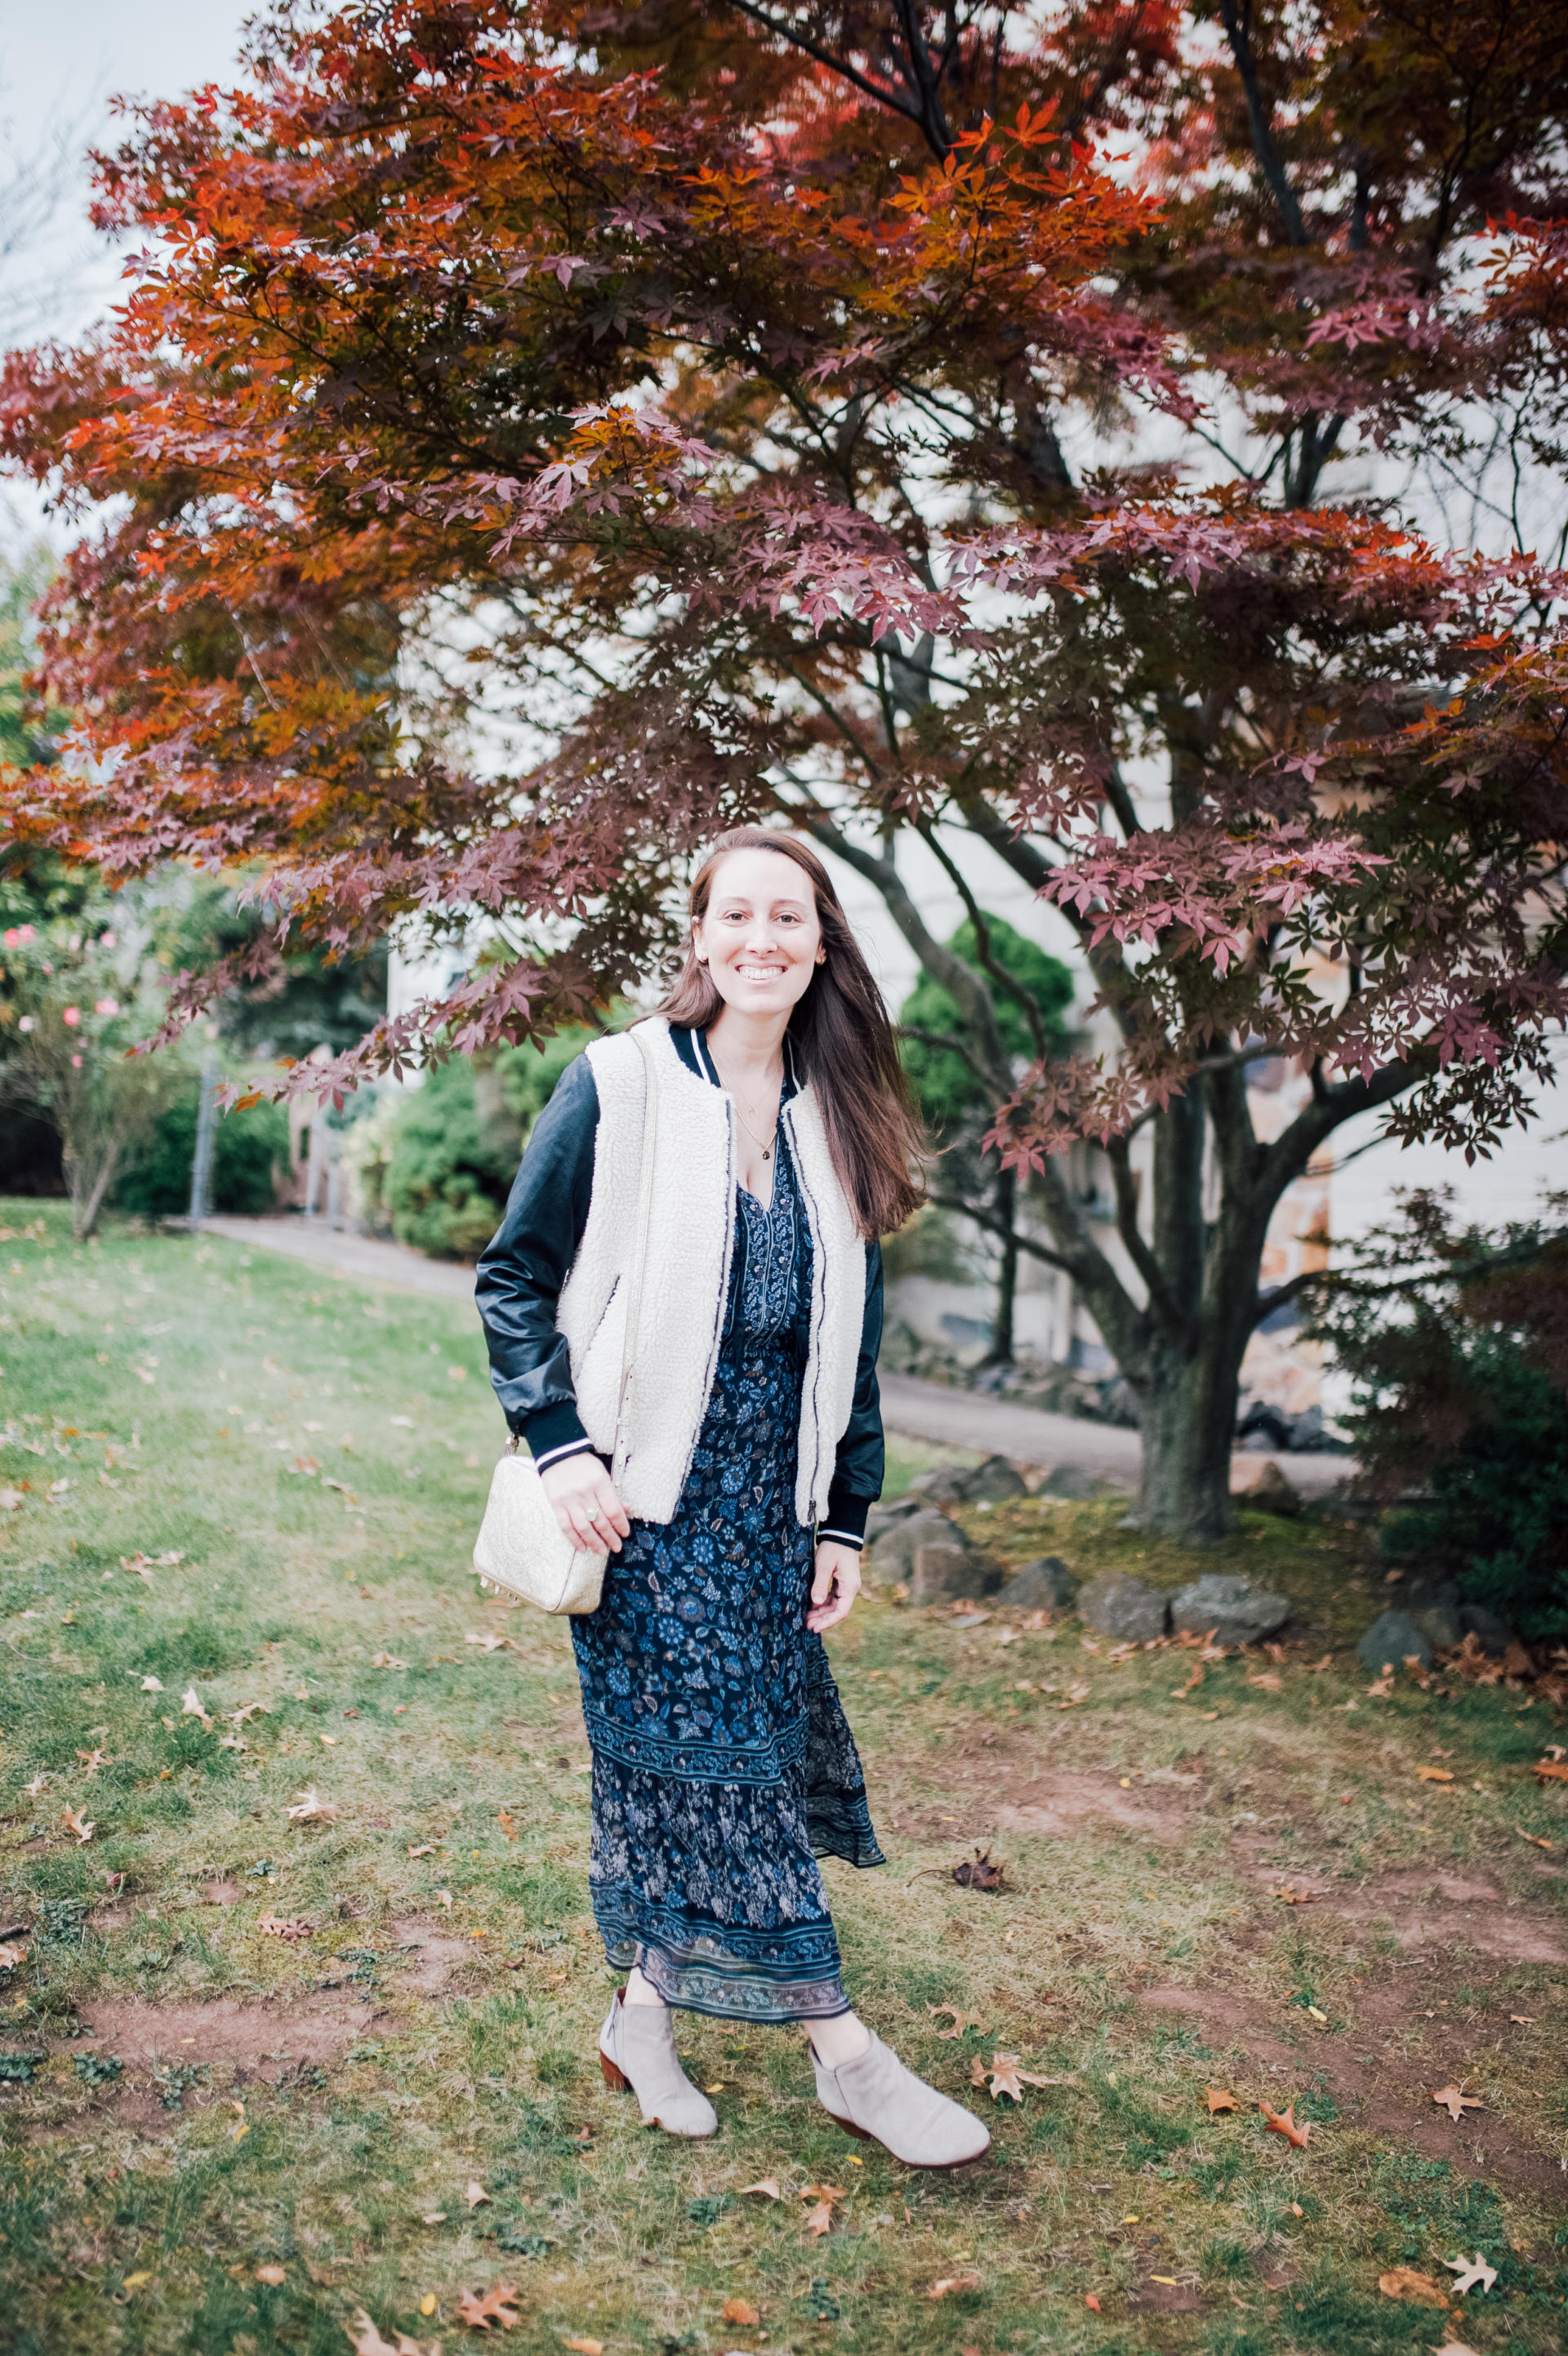 All Smiles: Favorite Fall Fashion Outfit by popular New Jersey fashion blogger What's For Dinner Esq.